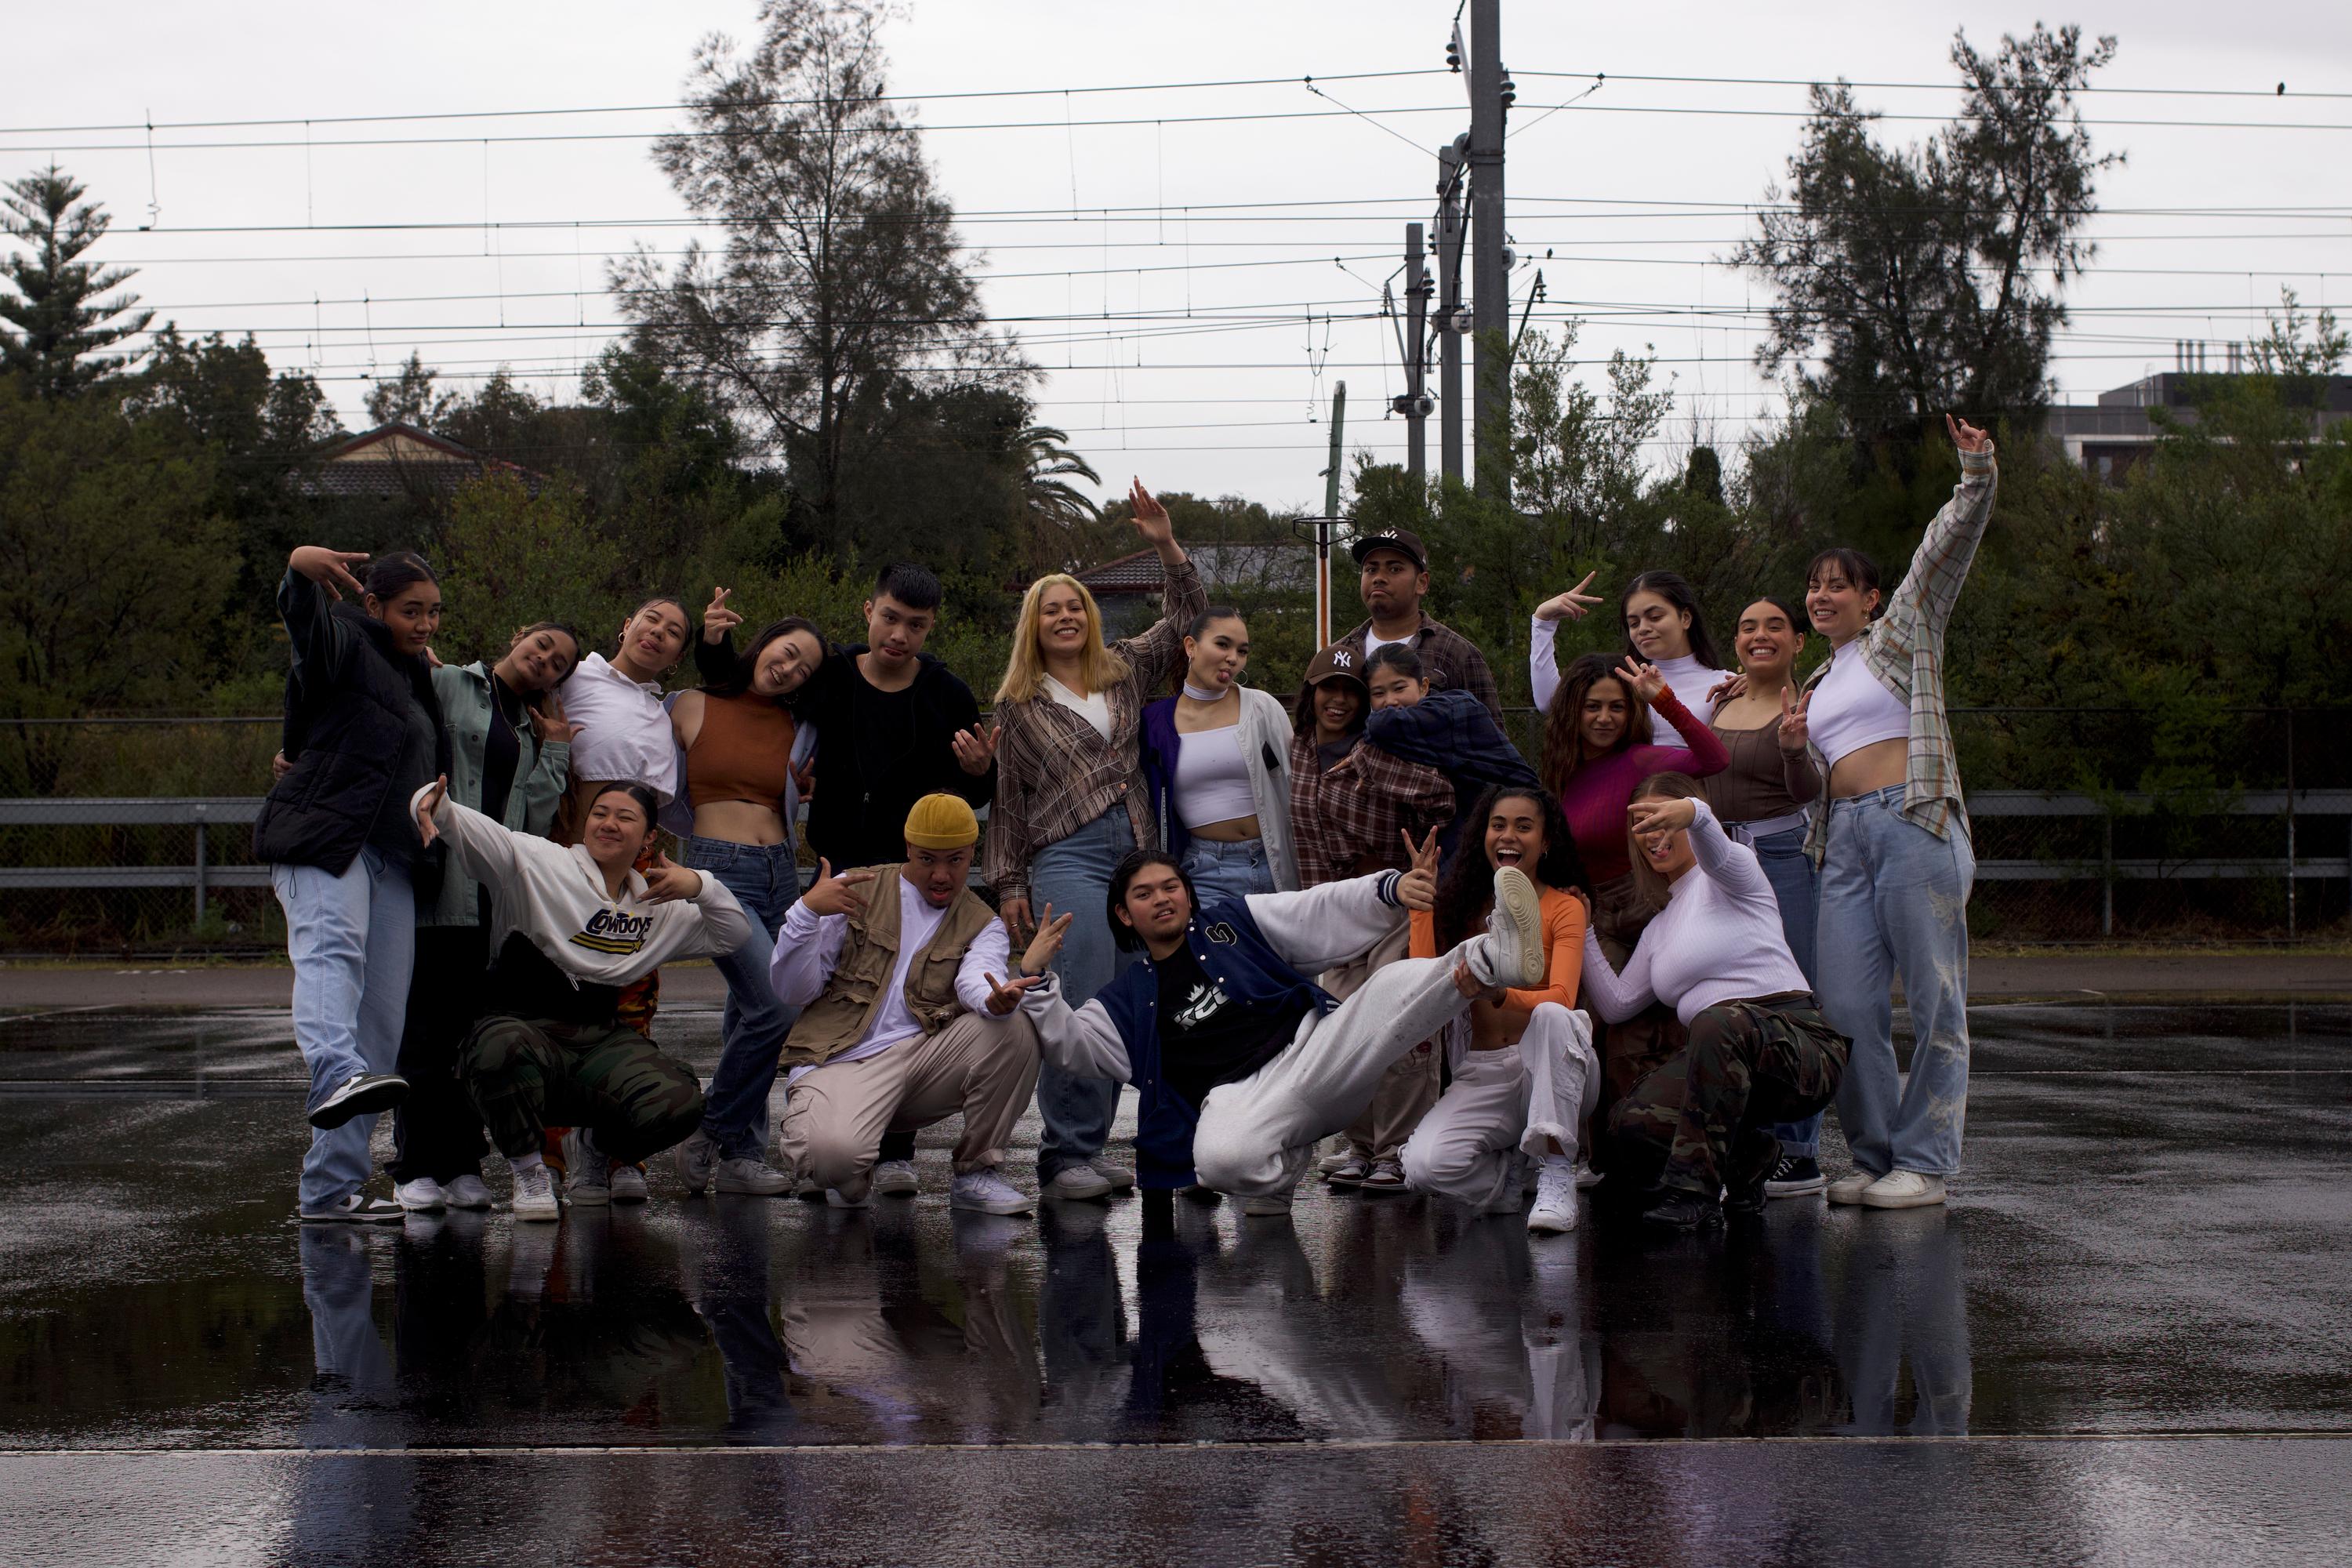 A group of young people dressed in street clothes pose in an empty carpark. The ground is wet. There are train lines visible in the background.